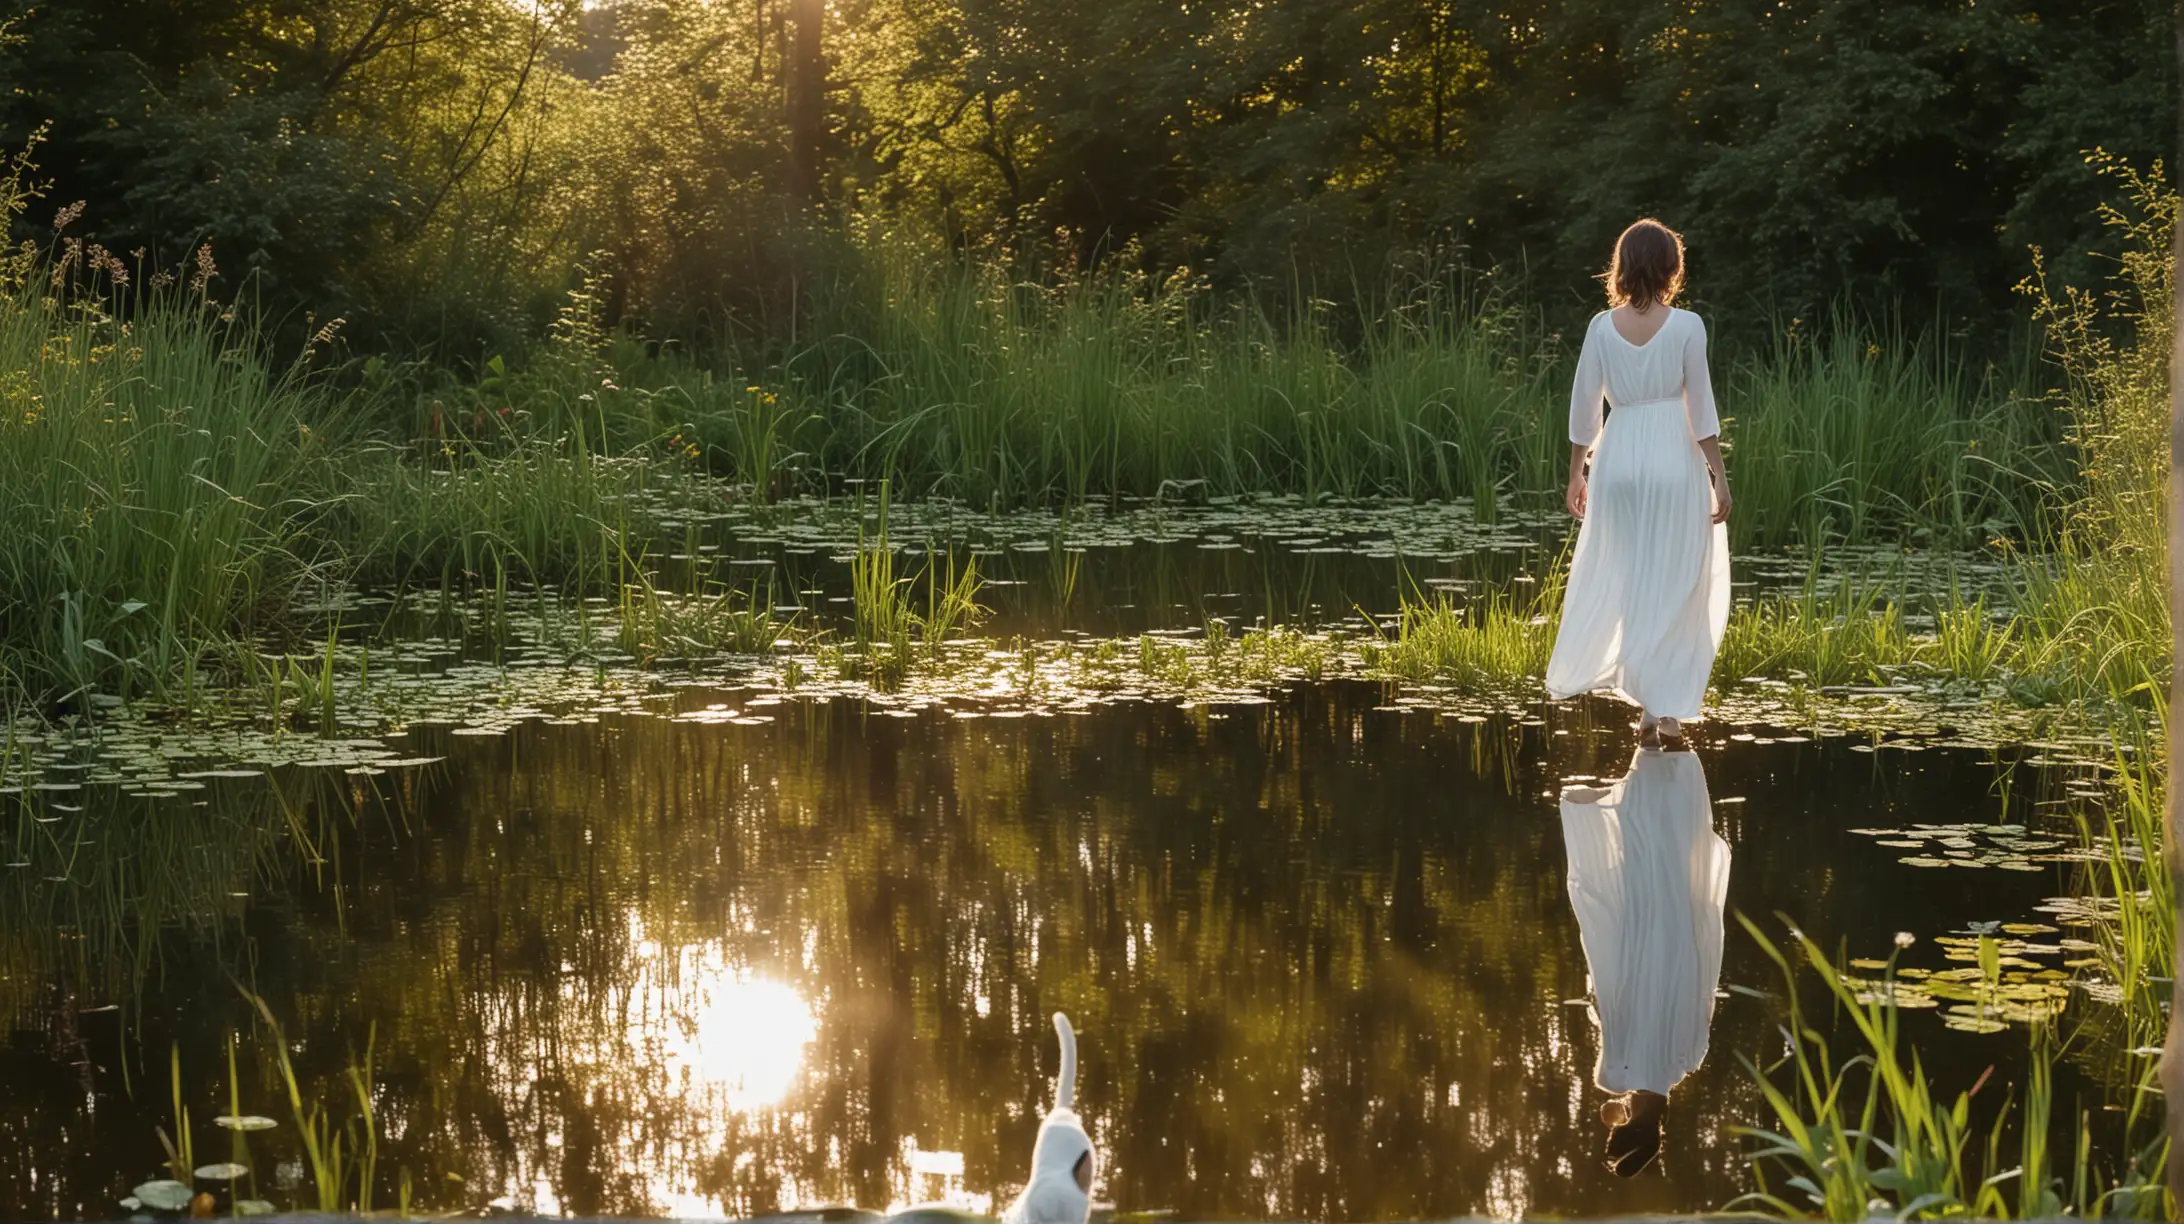 Woman in White Dress Walking with Black Cat by Wild Pond at Dusk